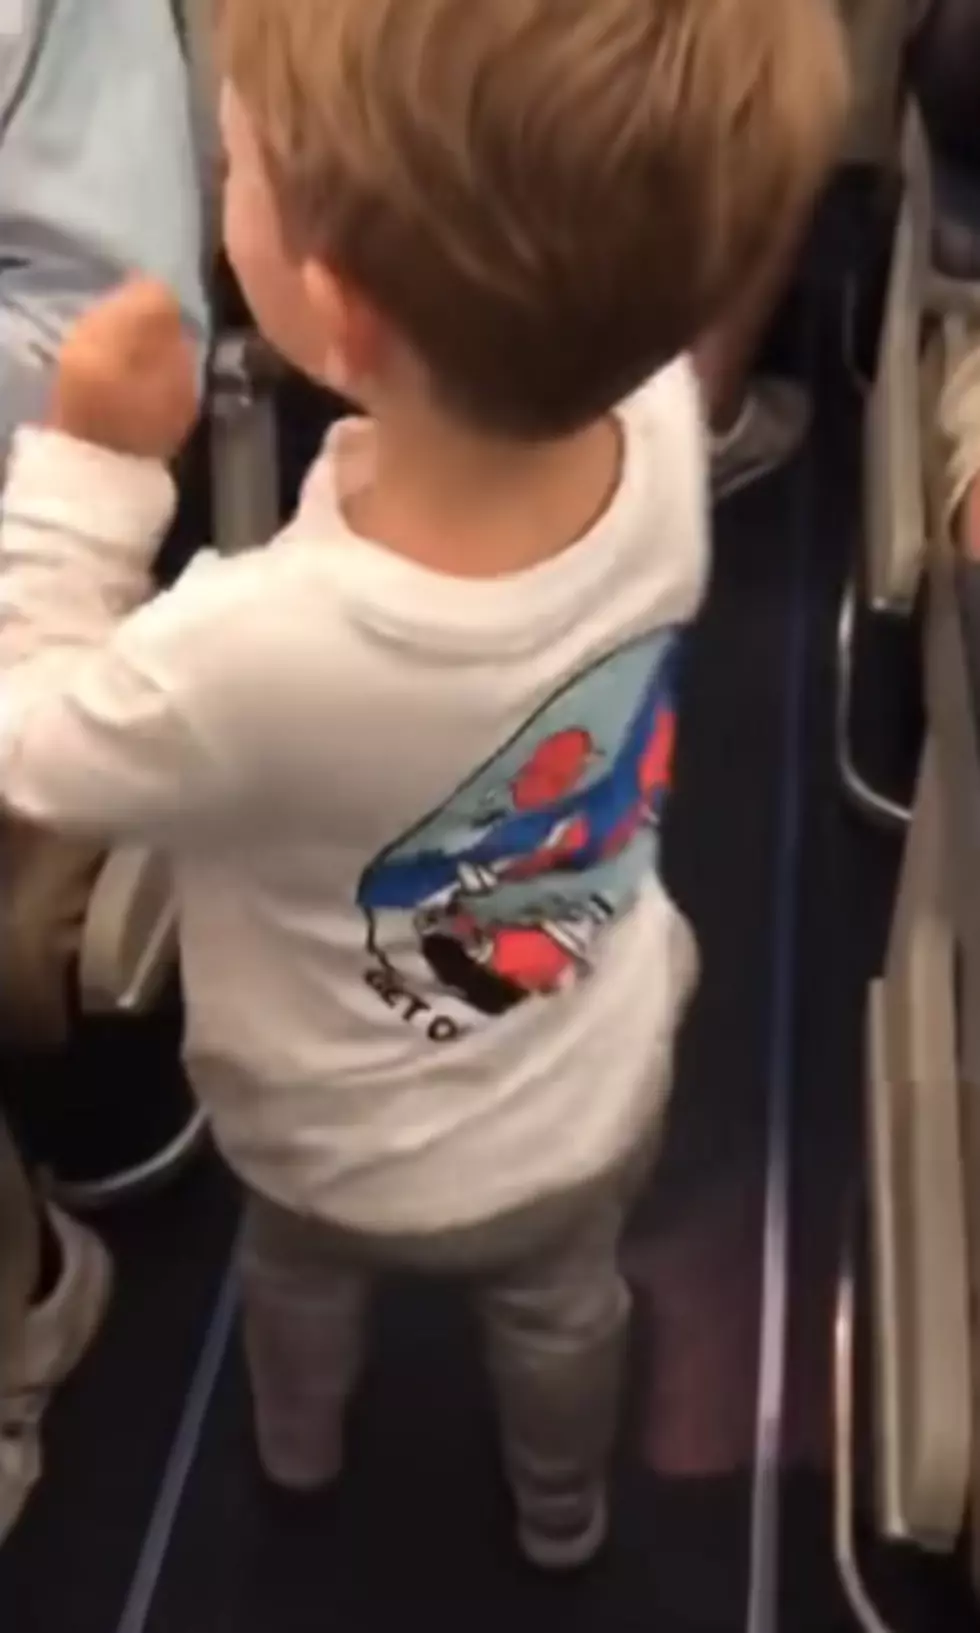 WATCH: This Little Boy Made Everyone Smile On An Airplane